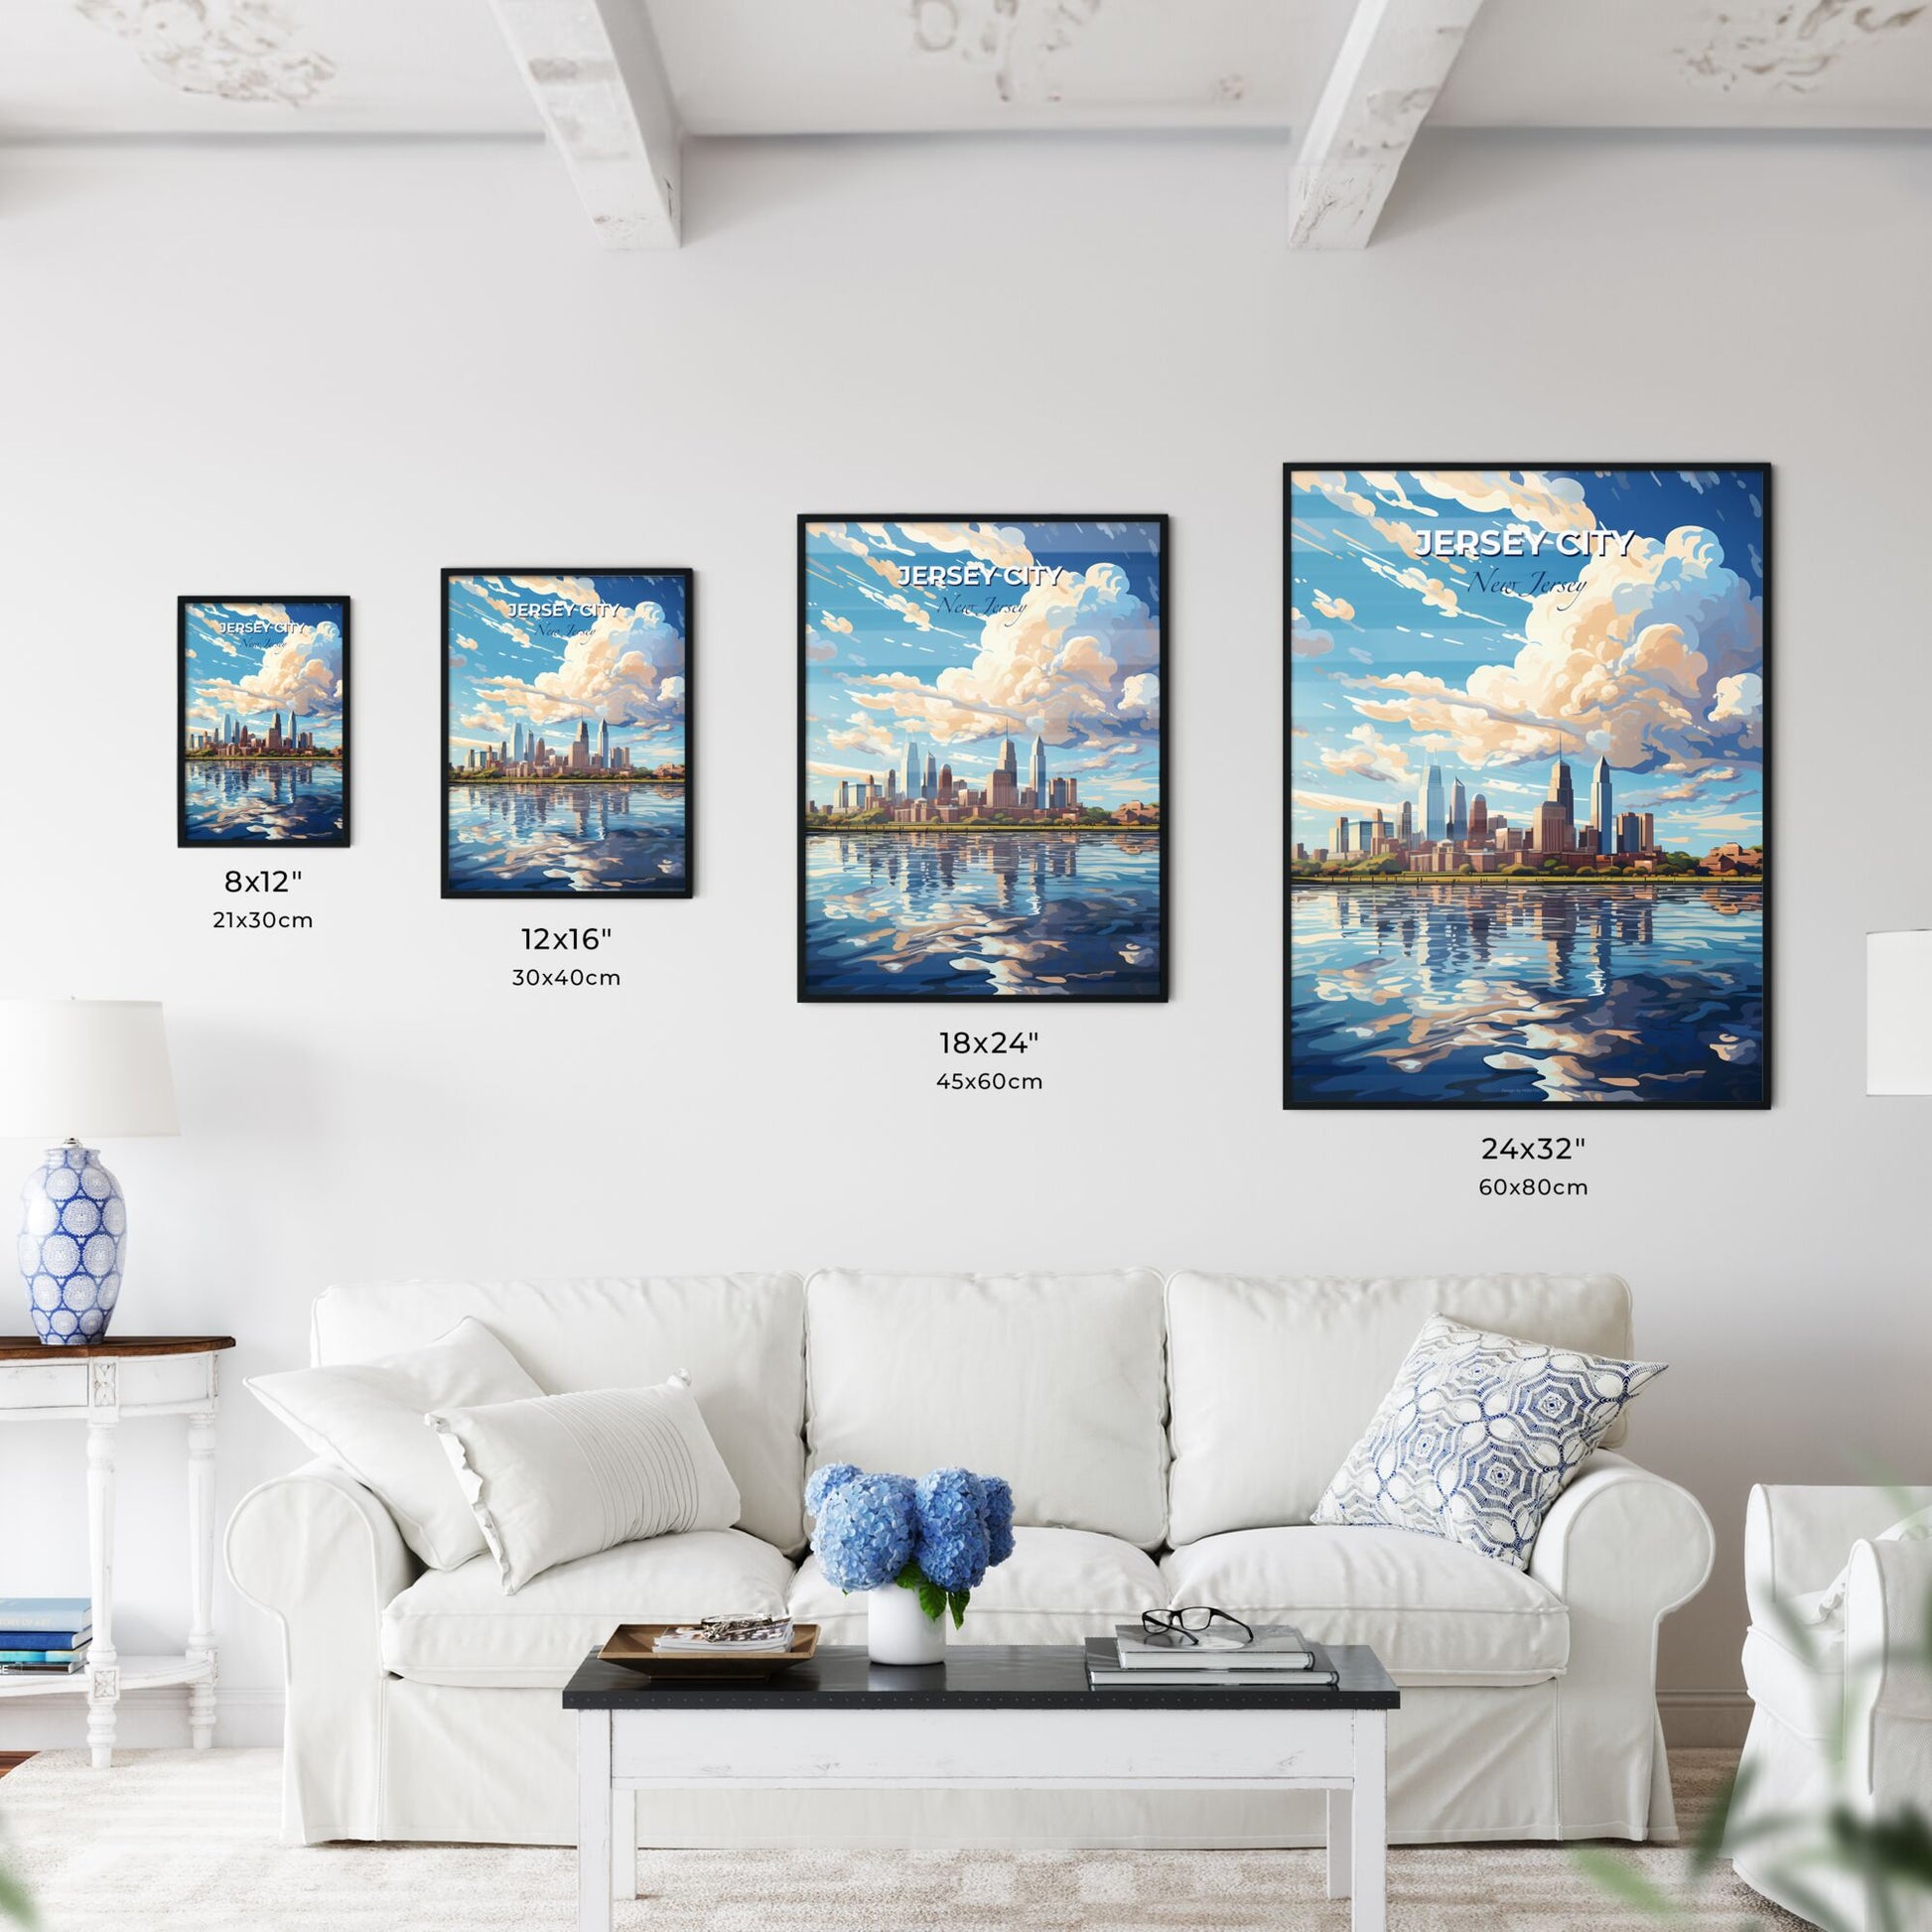 Jersey City New Jersey Skyline - A City Skyline With A Body Of Water And Clouds - Customizable Travel Gift Default Title